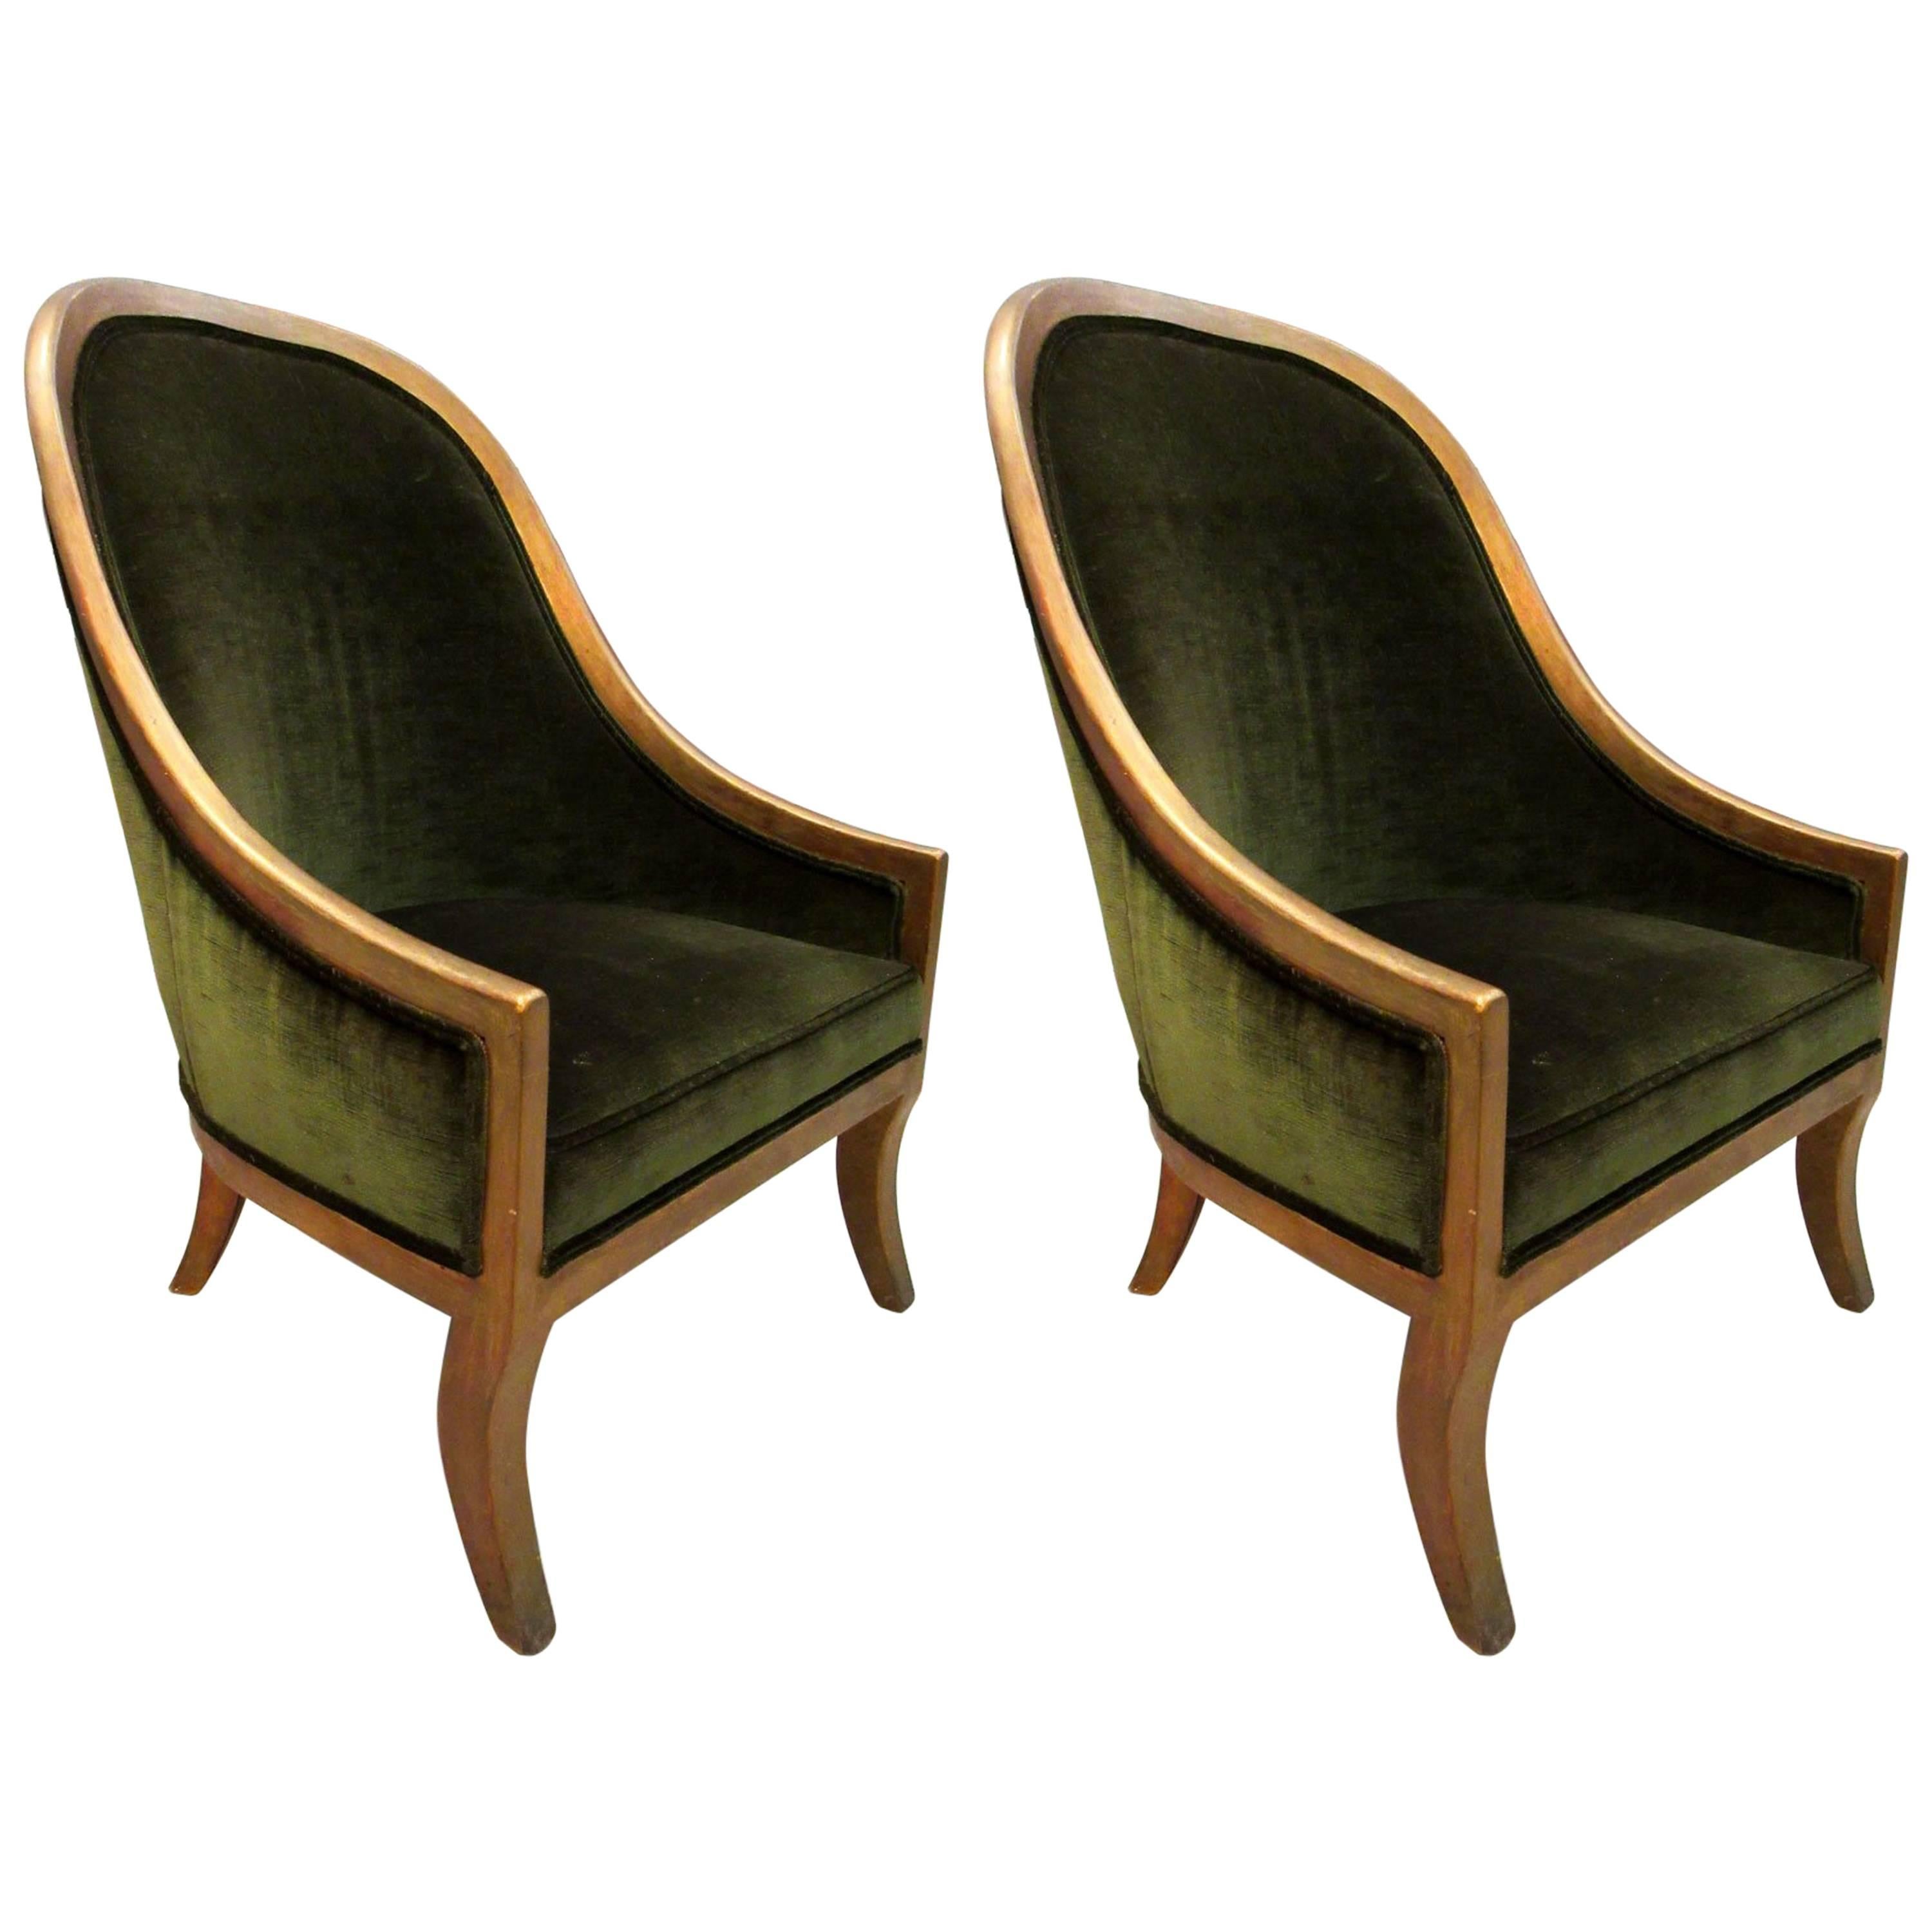 Pair of Slipper Chairs by B. Altman